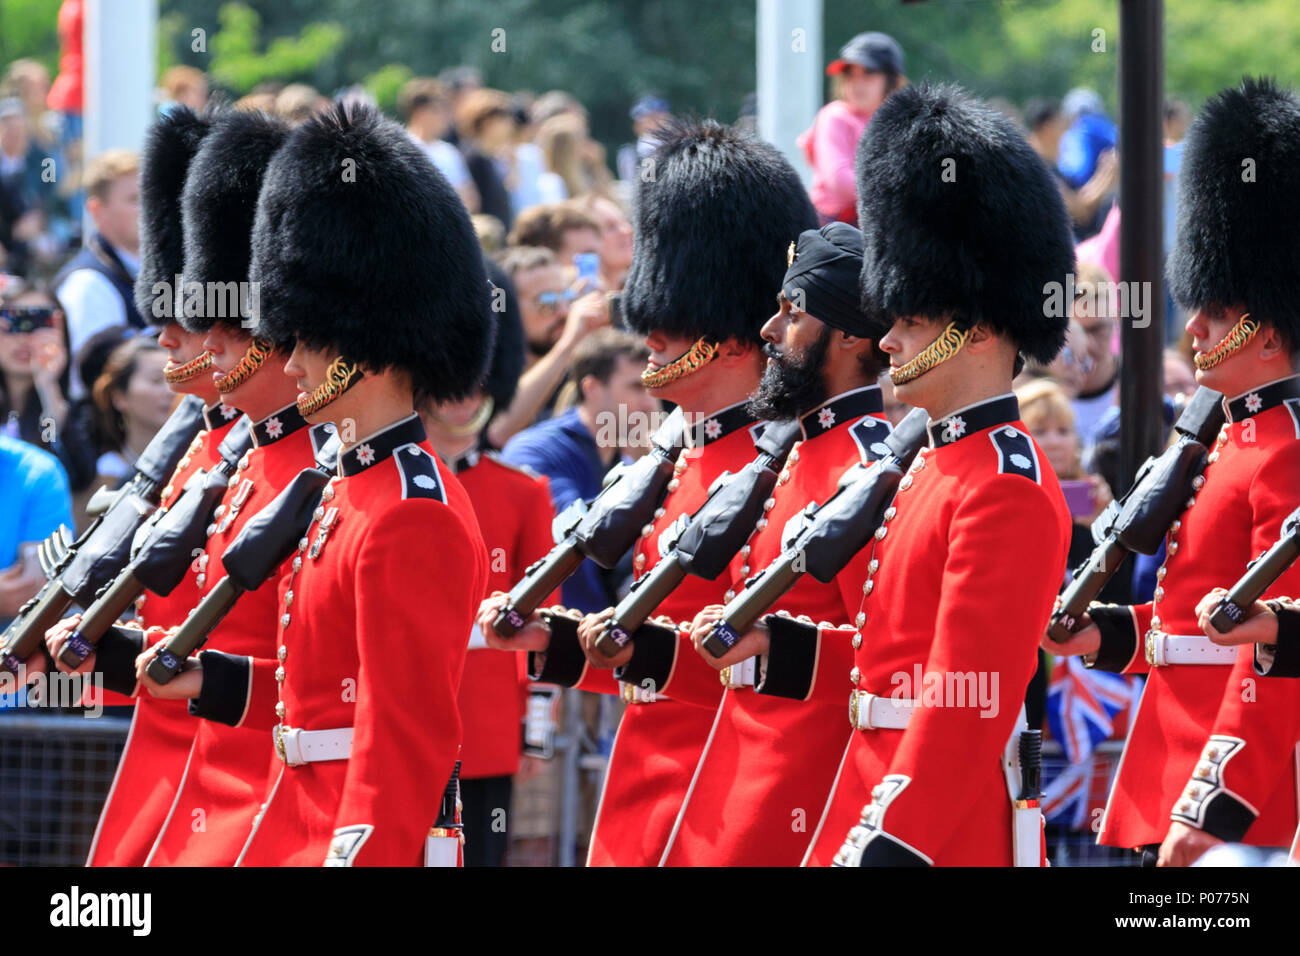 The Mall, London, UK, 9th June 2018. A Sikh soldier, Guardsman Charanpreet Singh Lall (middle), is the first to wear a turban (dastar) at Trooping the Colour. The Sovereign's birthday is officially celebrated by the ceremony of Trooping the Colour, the Queen's Birthday Parade. Troops from the  Household Division, overall 1400 officers and soldiers are on parade, together with two hundred horses; over four hundred musicians from ten bands and corps of drums. Stock Photo